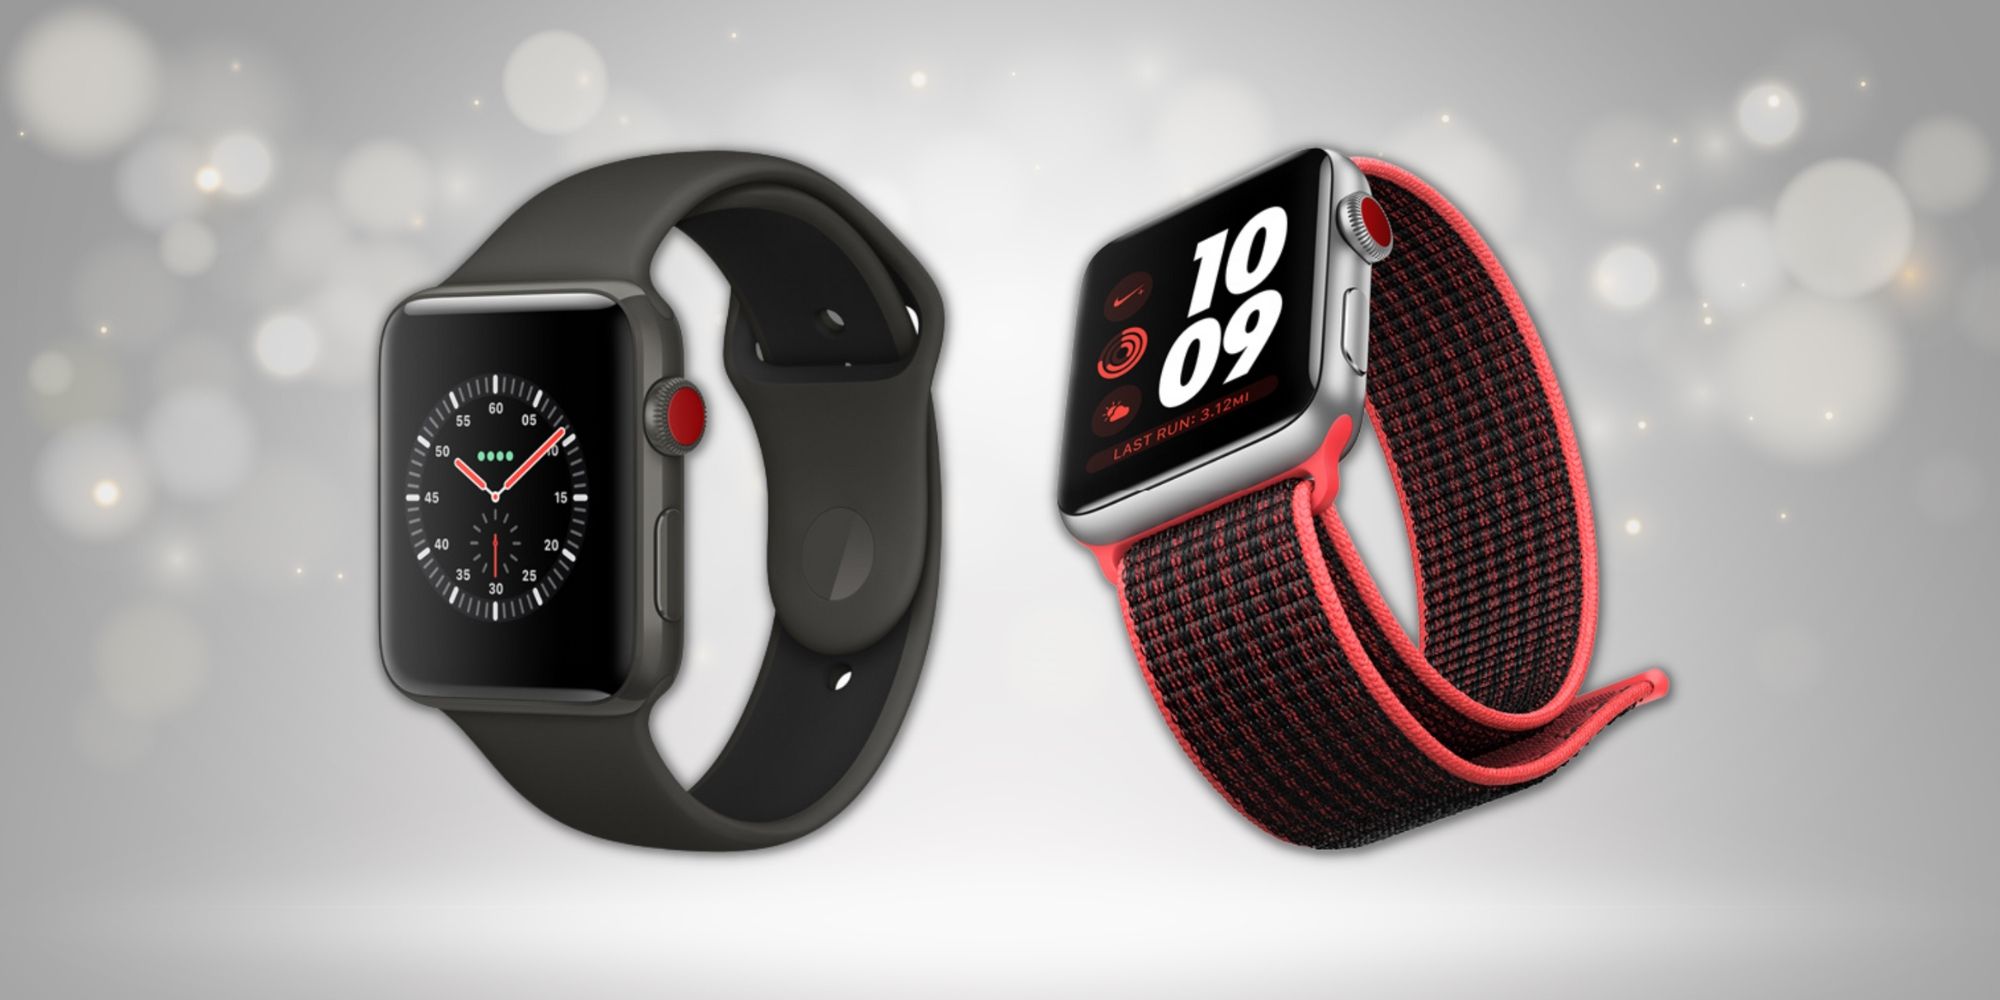 Apple Watch Series 3 in black and nike red color